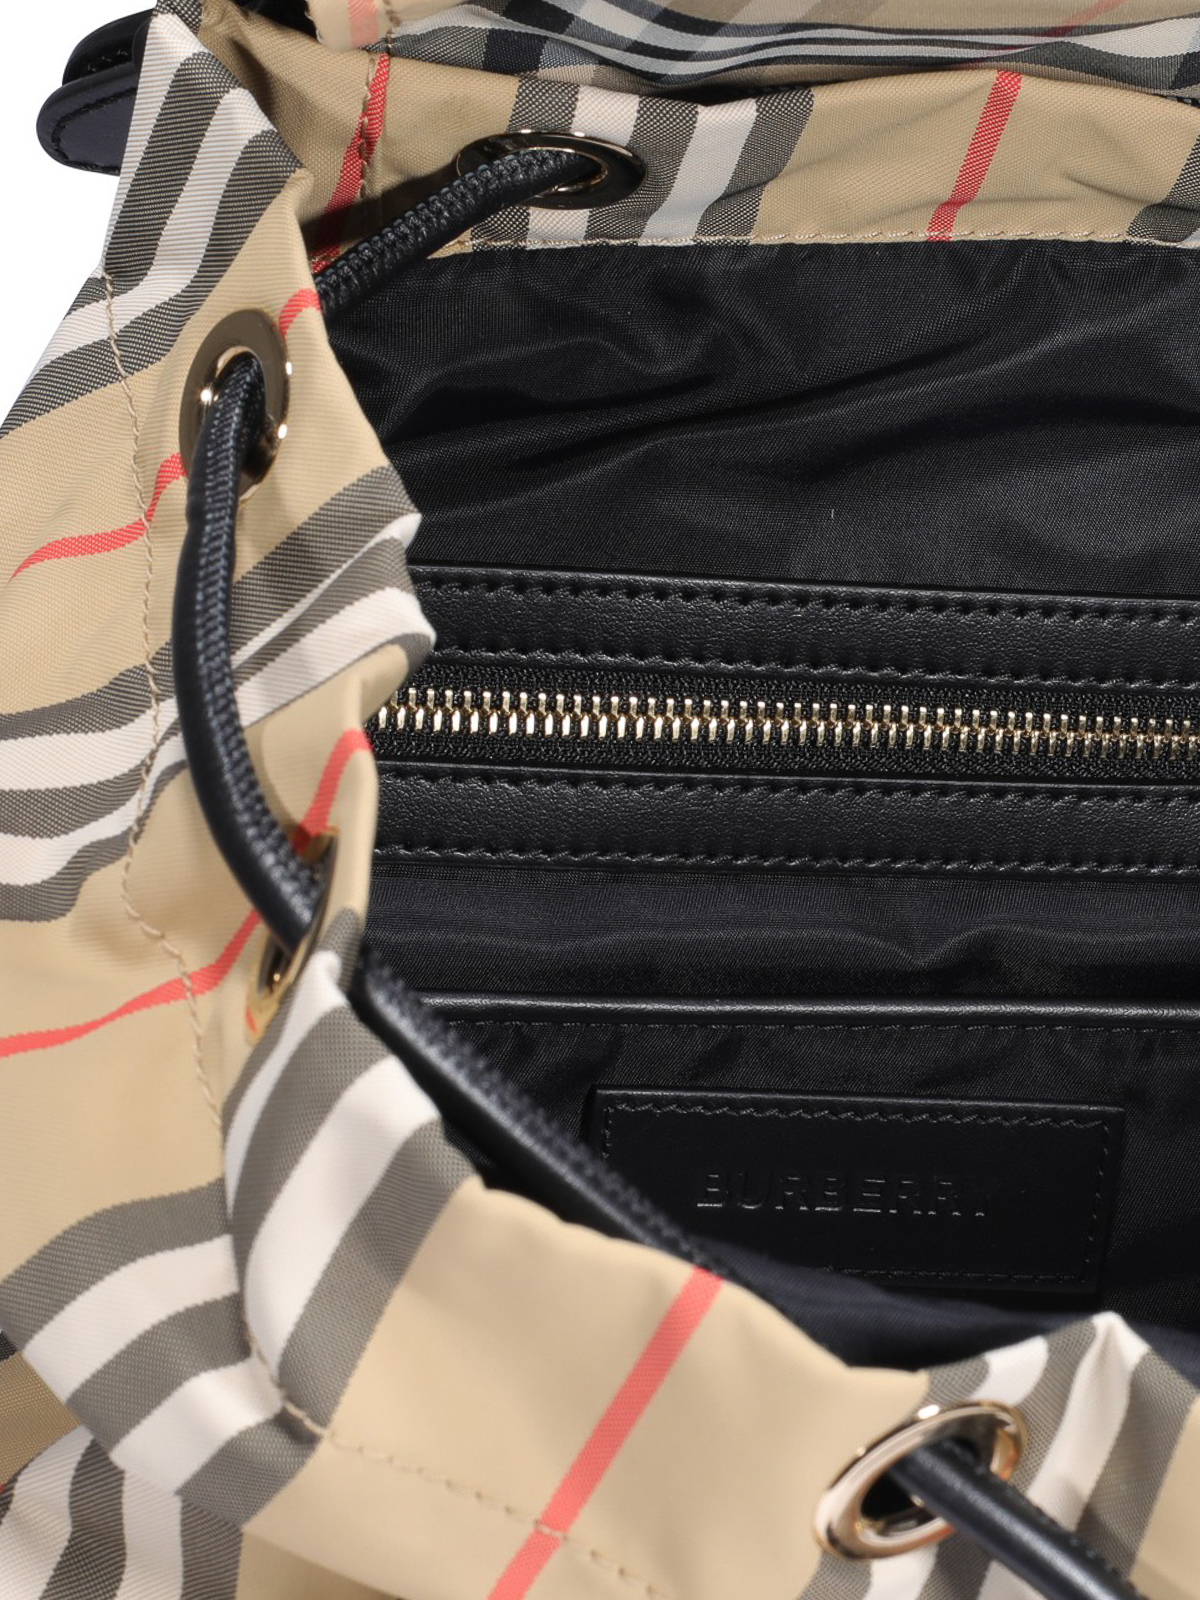 The Classic Vintage Burberry Bag, Review